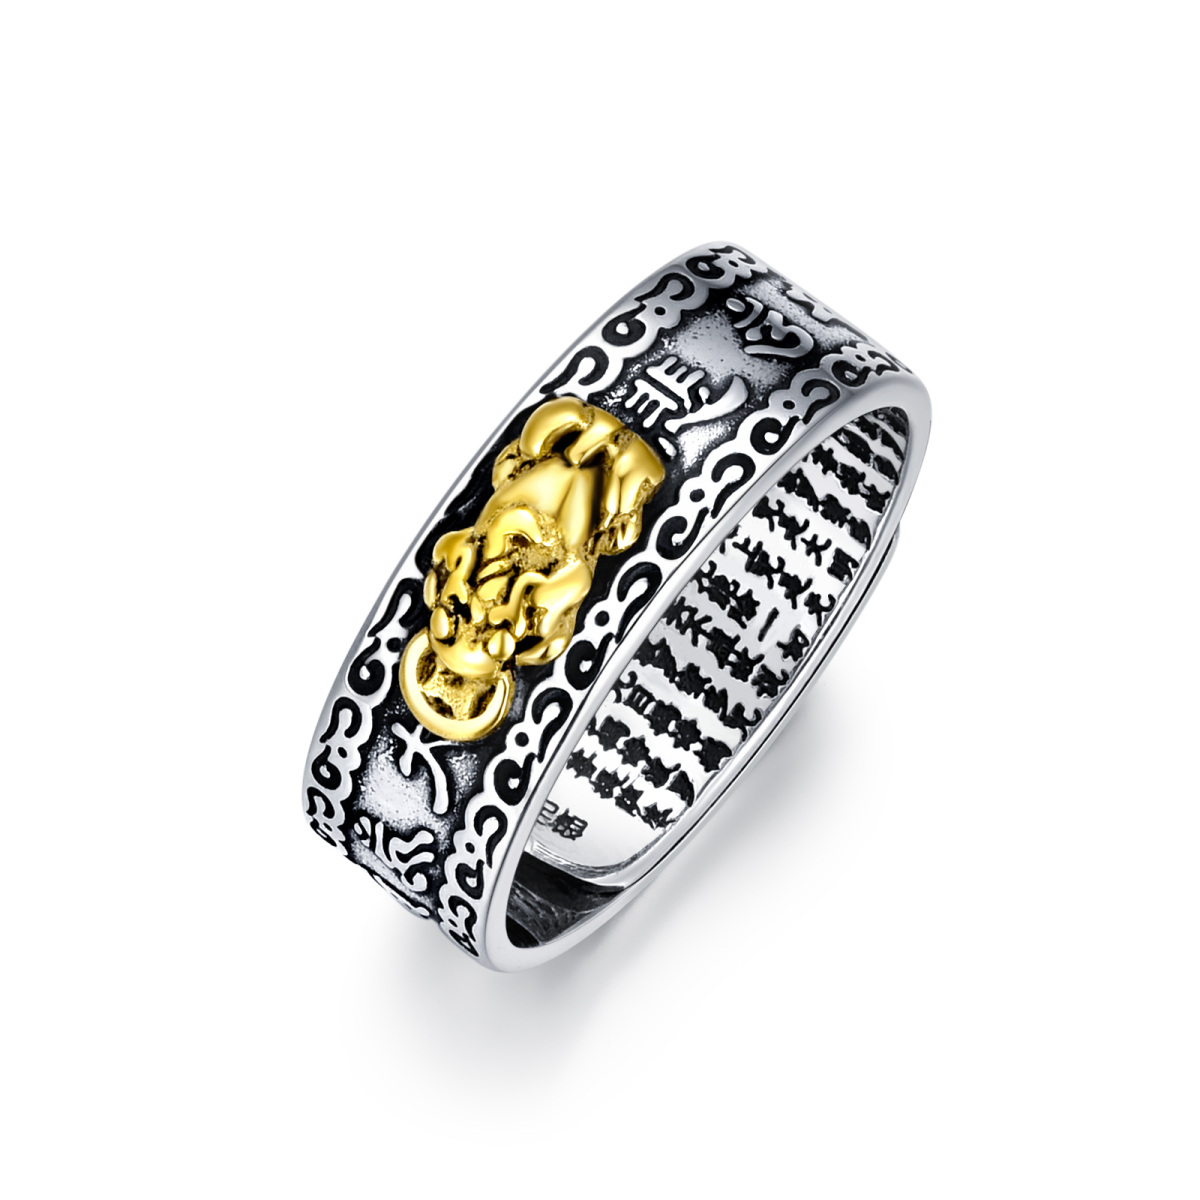 Feng Shui Ring Pixiu Mantra Ring Protection Wealth Adjustable Rings Gift for Women-1